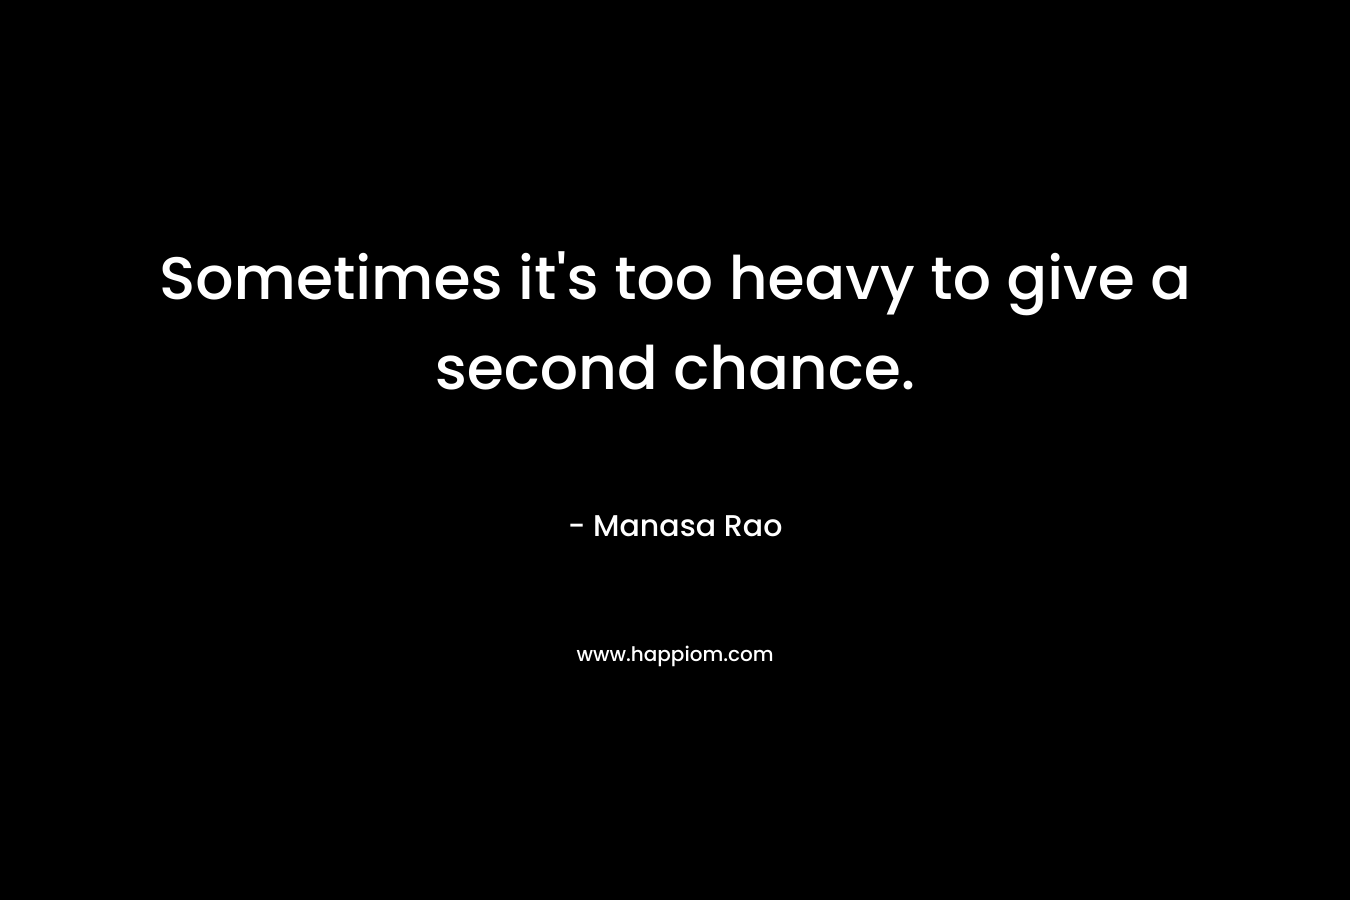 Sometimes it’s too heavy to give a second chance. – Manasa Rao